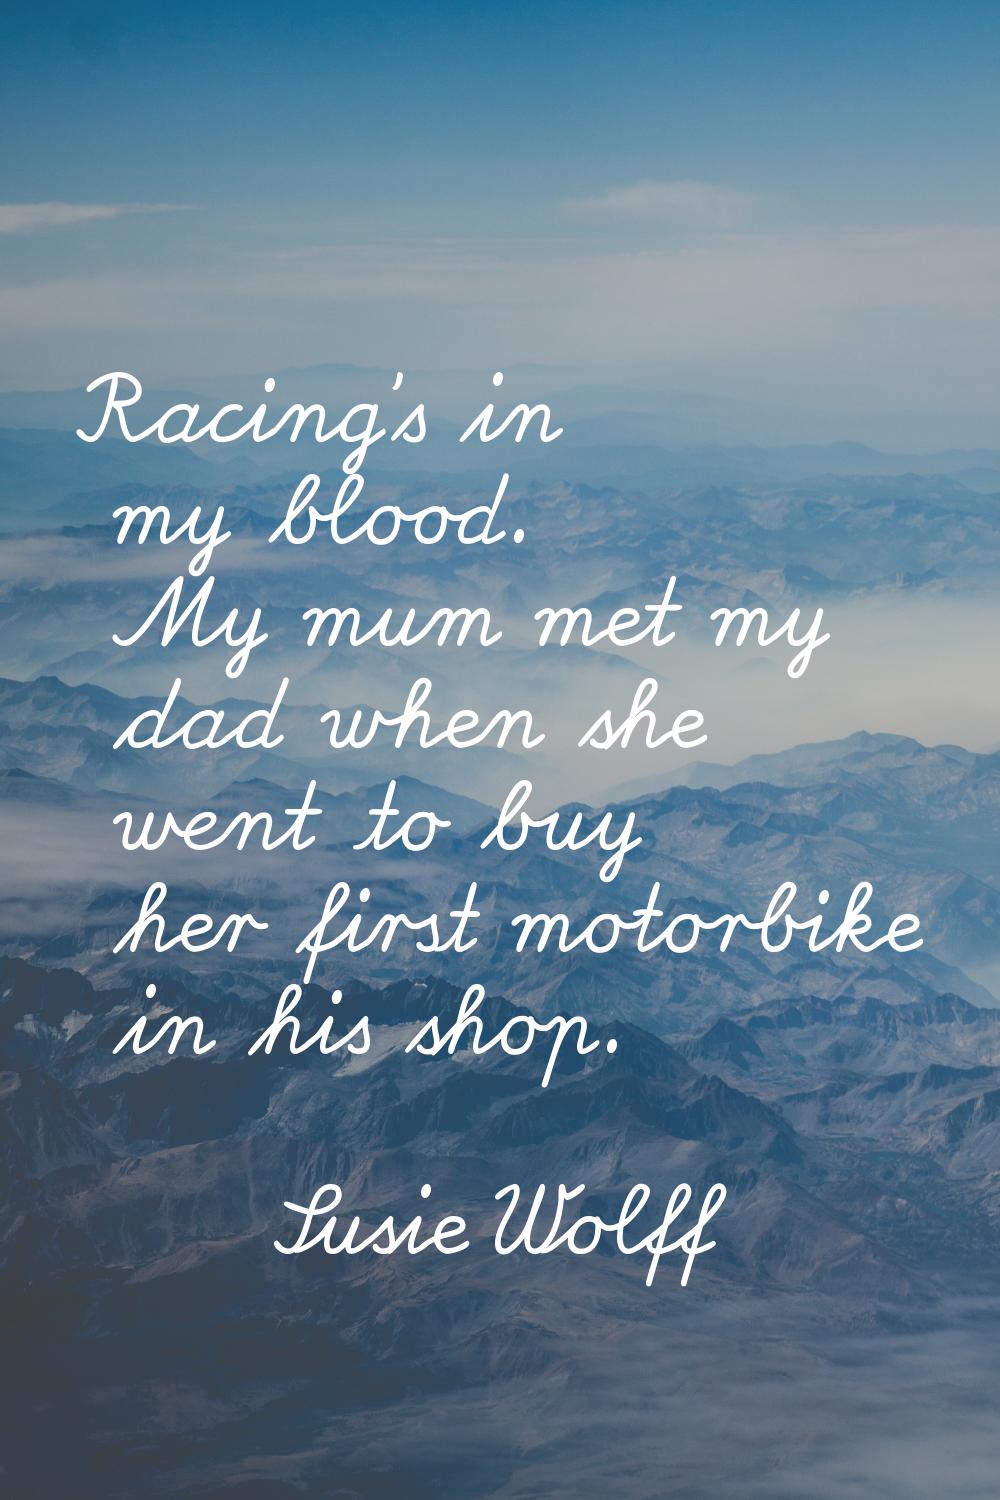 Racing's in my blood. My mum met my dad when she went to buy her first motorbike in his shop.